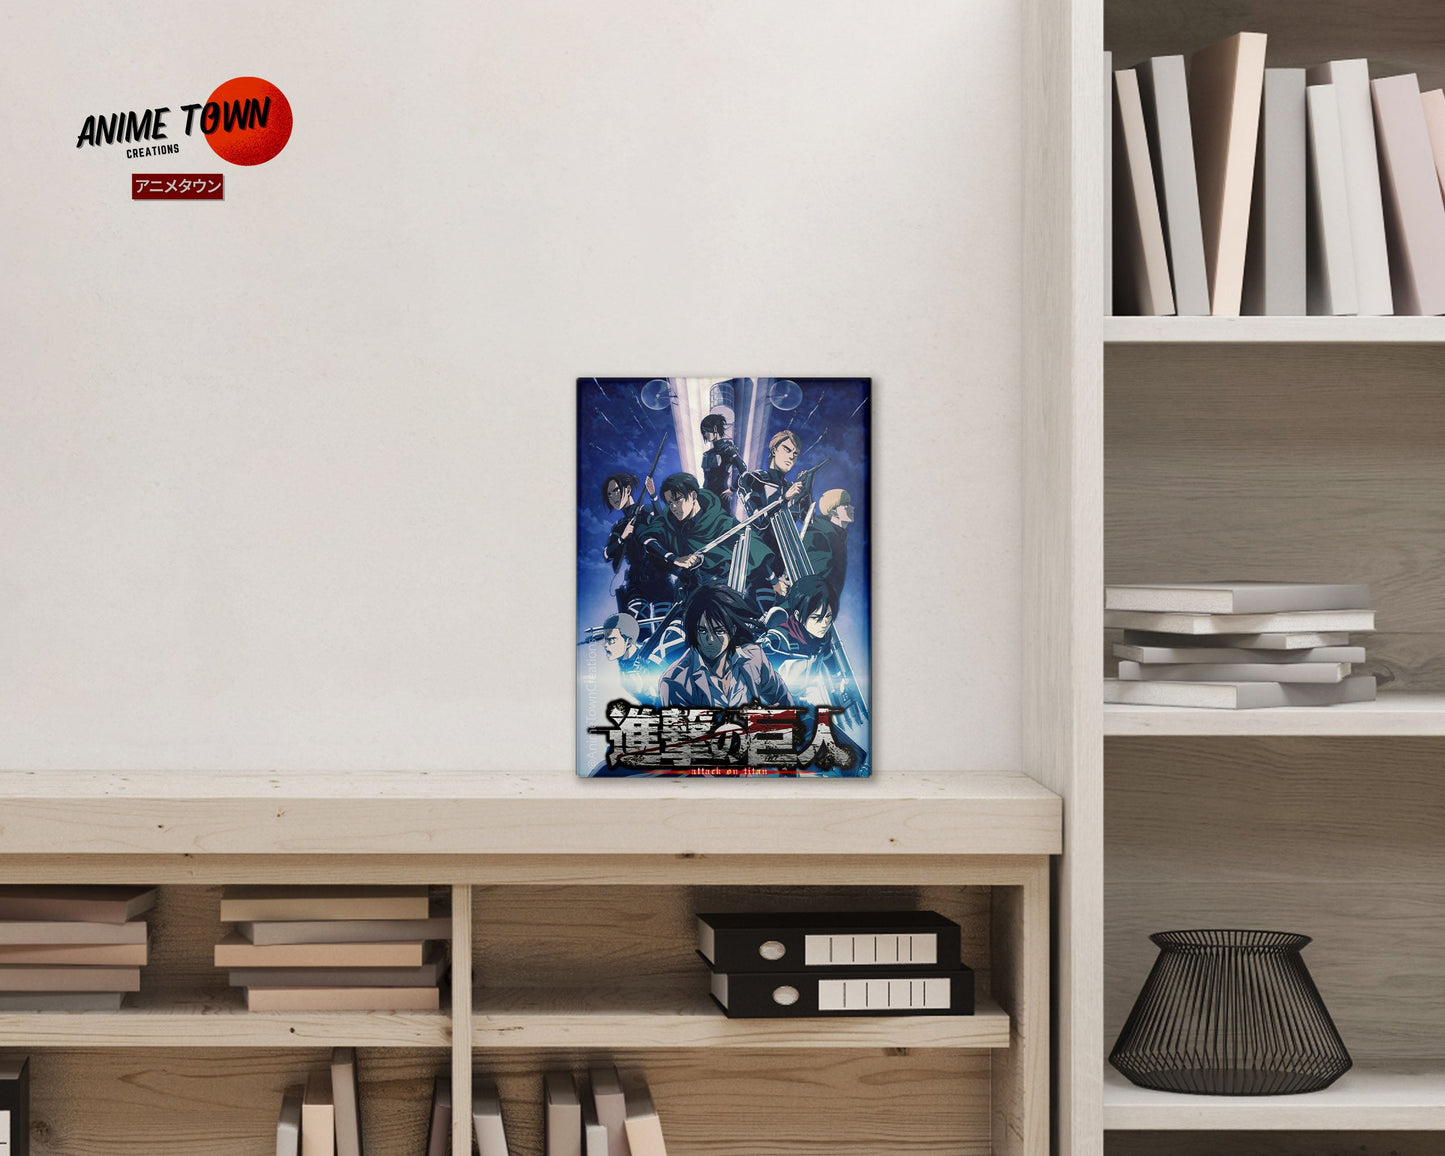 Anime Town Creations Metal Poster Attack on Titan The Final Season 5" x 7" Home Goods - Anime Attack on Titan Metal Poster